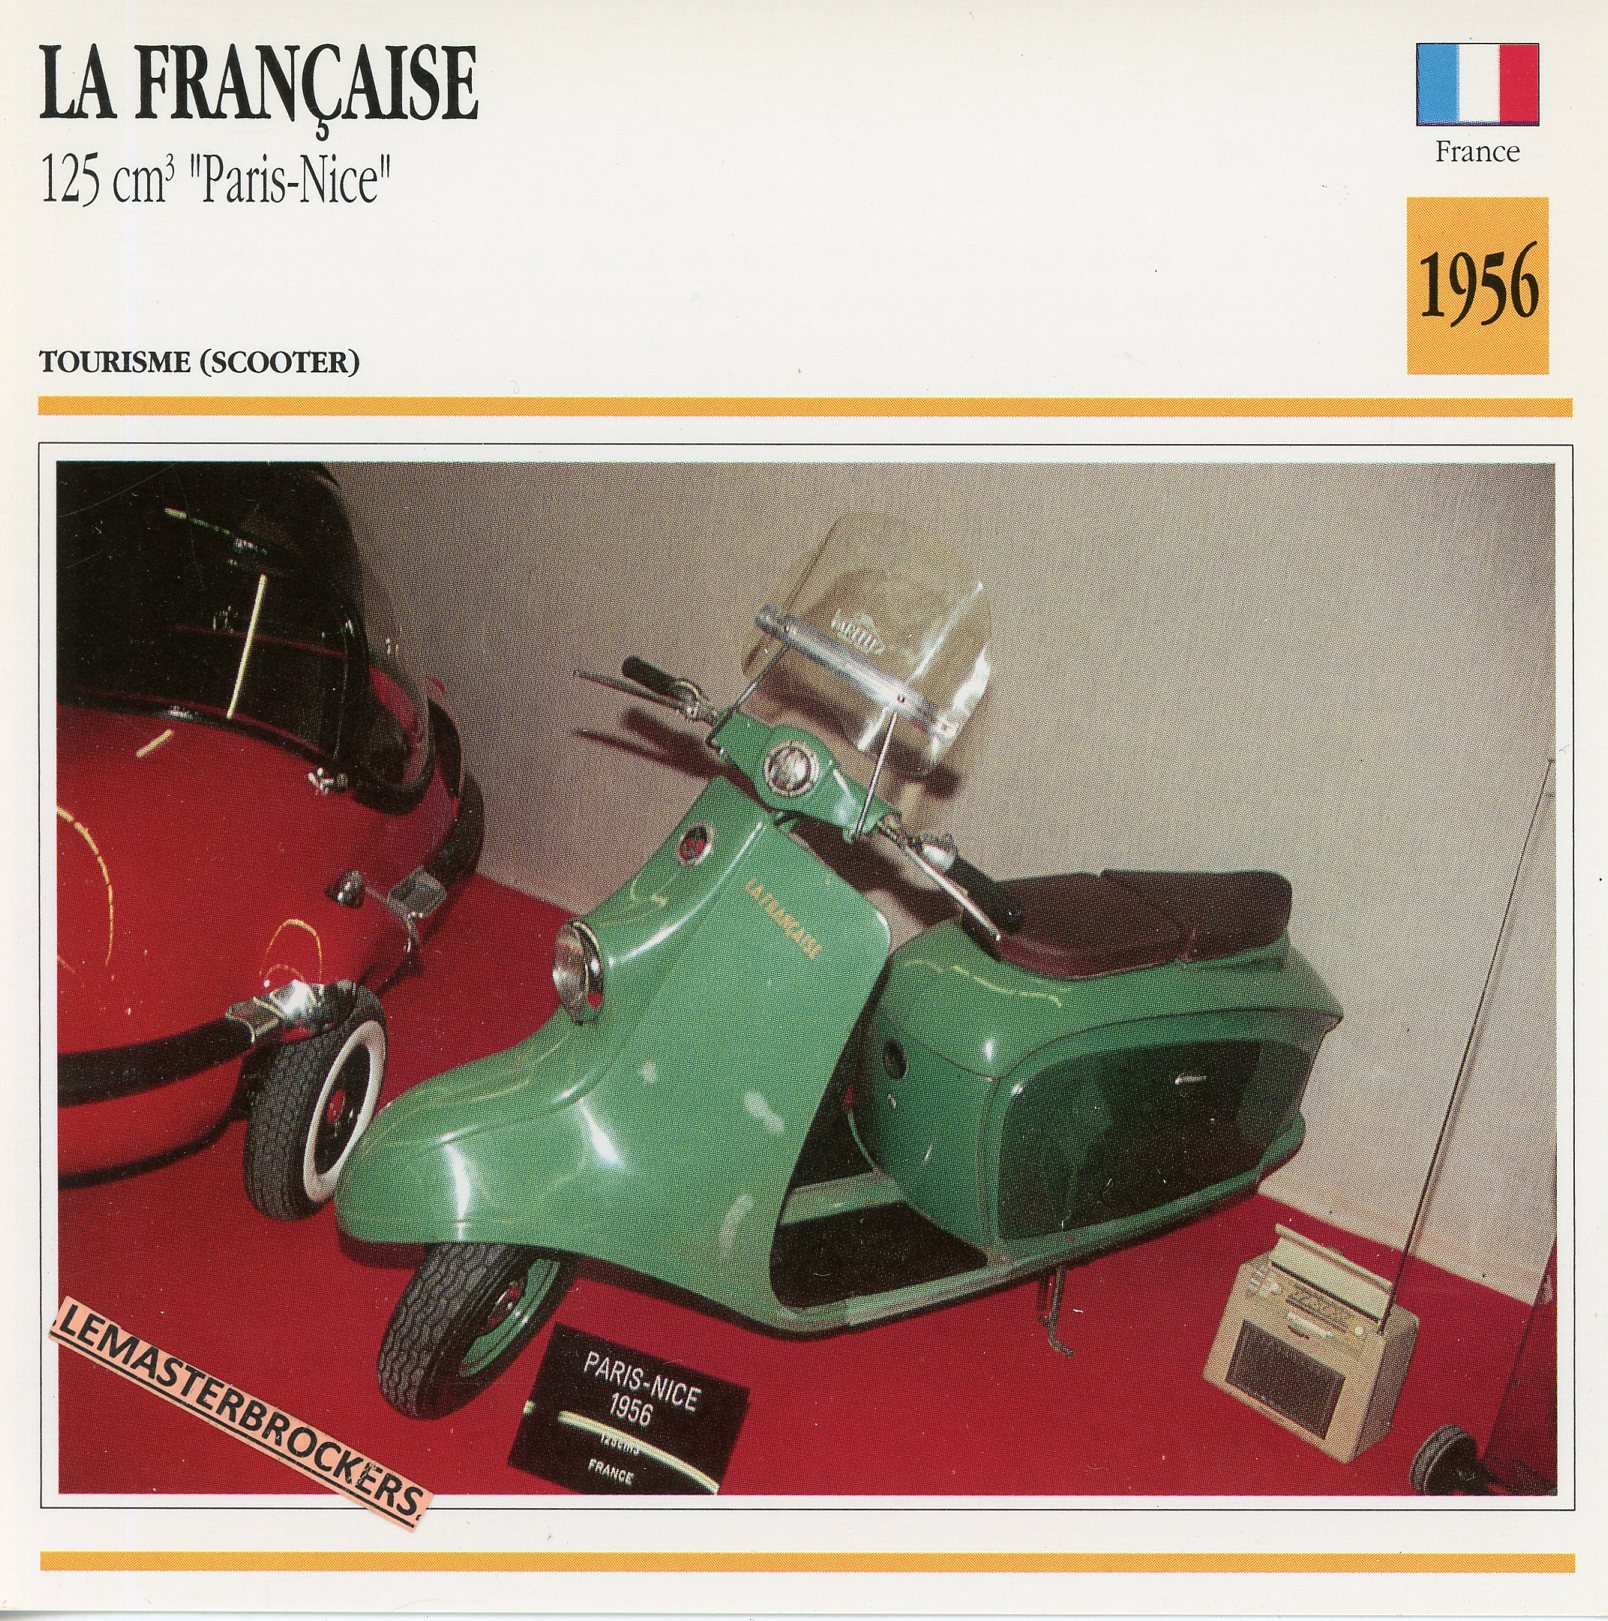 LAFRANCAISE-125-PARIS-NICE-1956-FICHE-SCOOTER-MOTORCYCLE-CARDS-ATLAS-LEMASTERBROCKERS